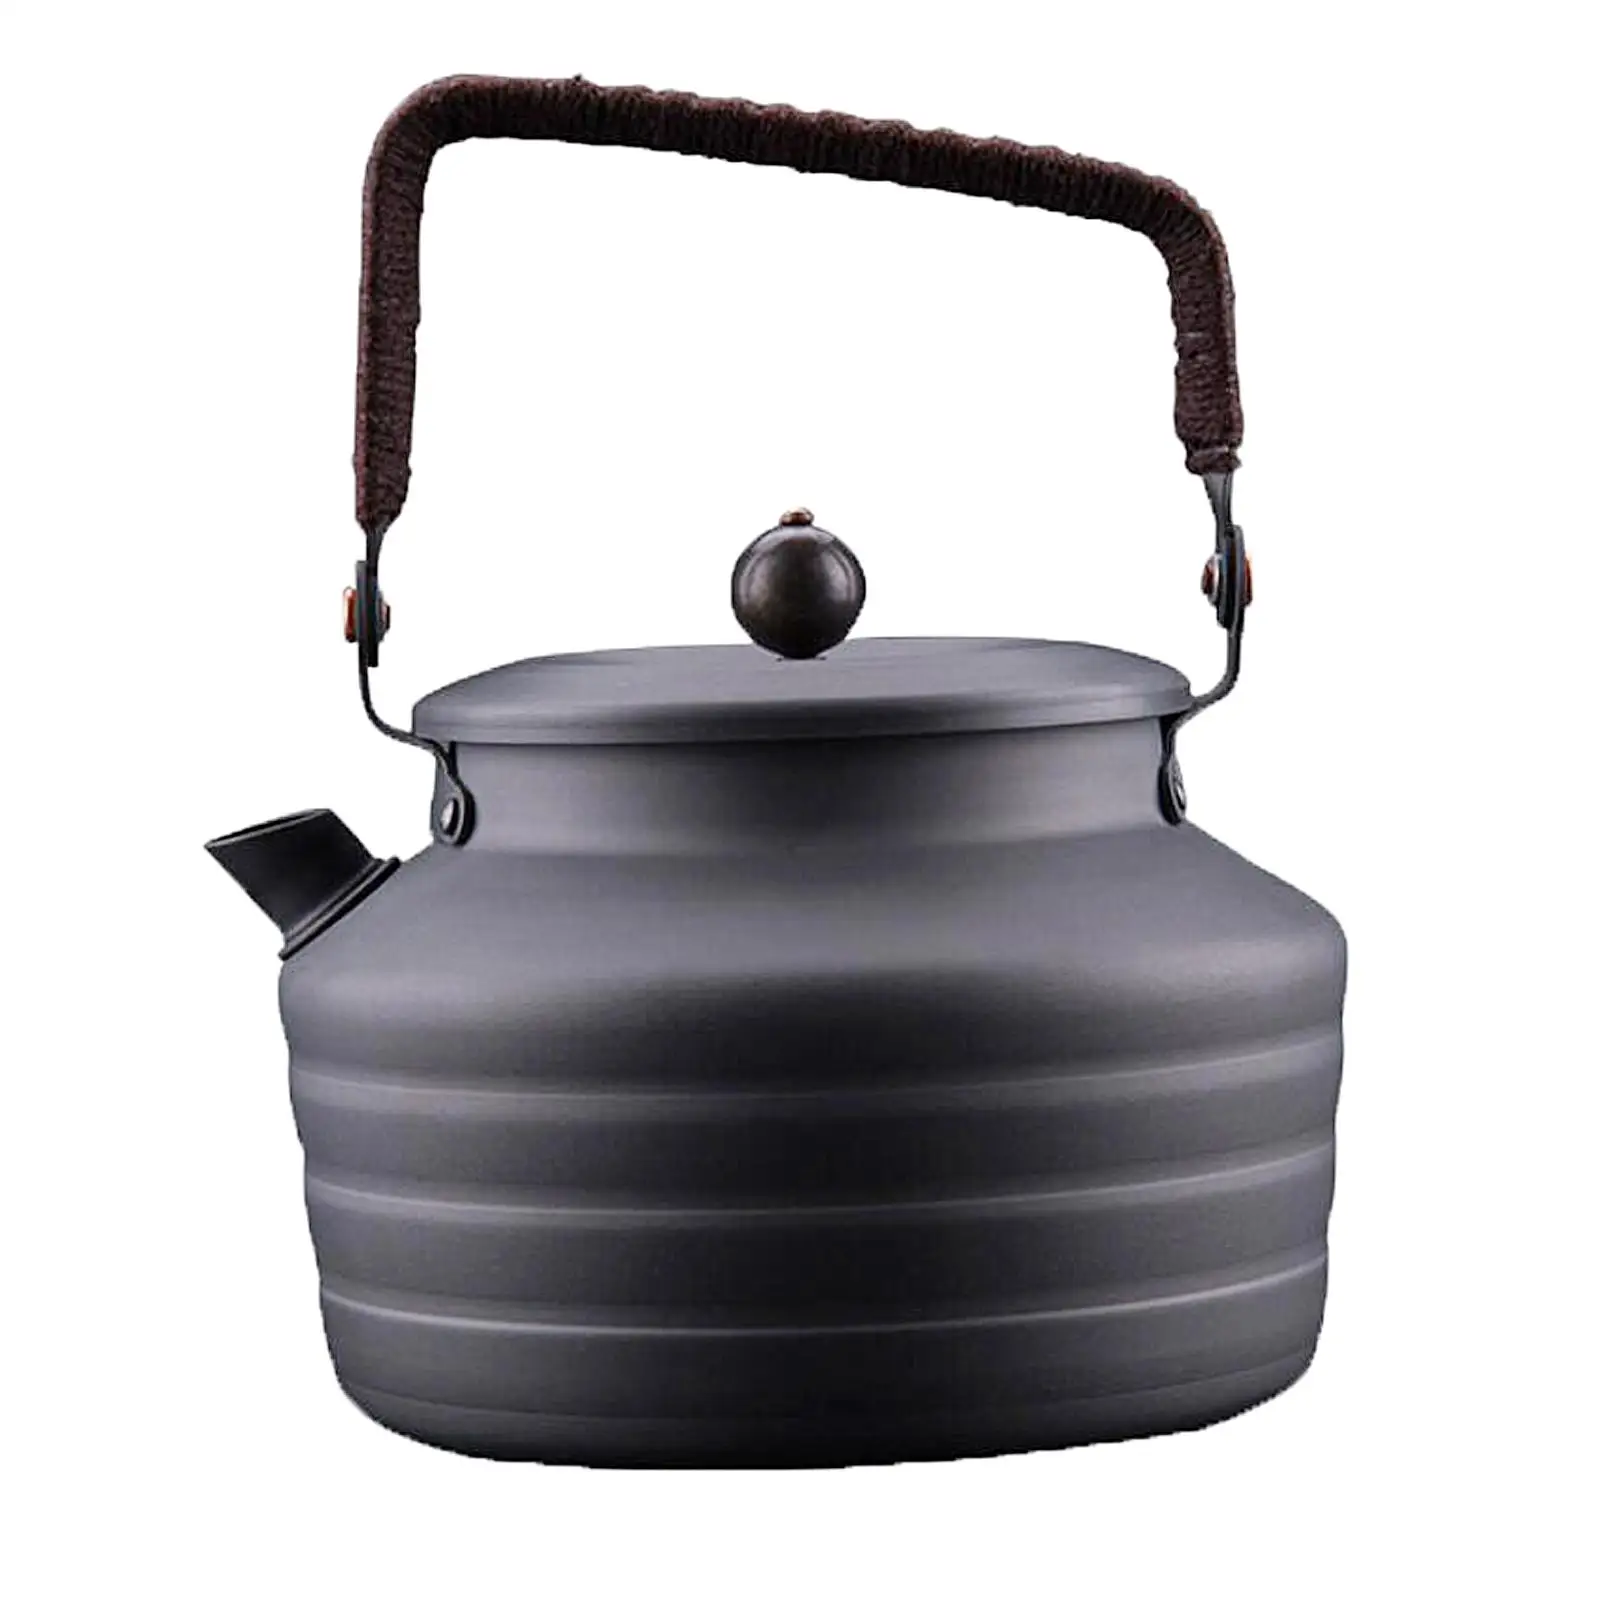 1.3 L Camping Kettle, Compact, Lightweight Aluminum  Pot for Hiking, Trekking, And Picnic  And  Resistant Cooking